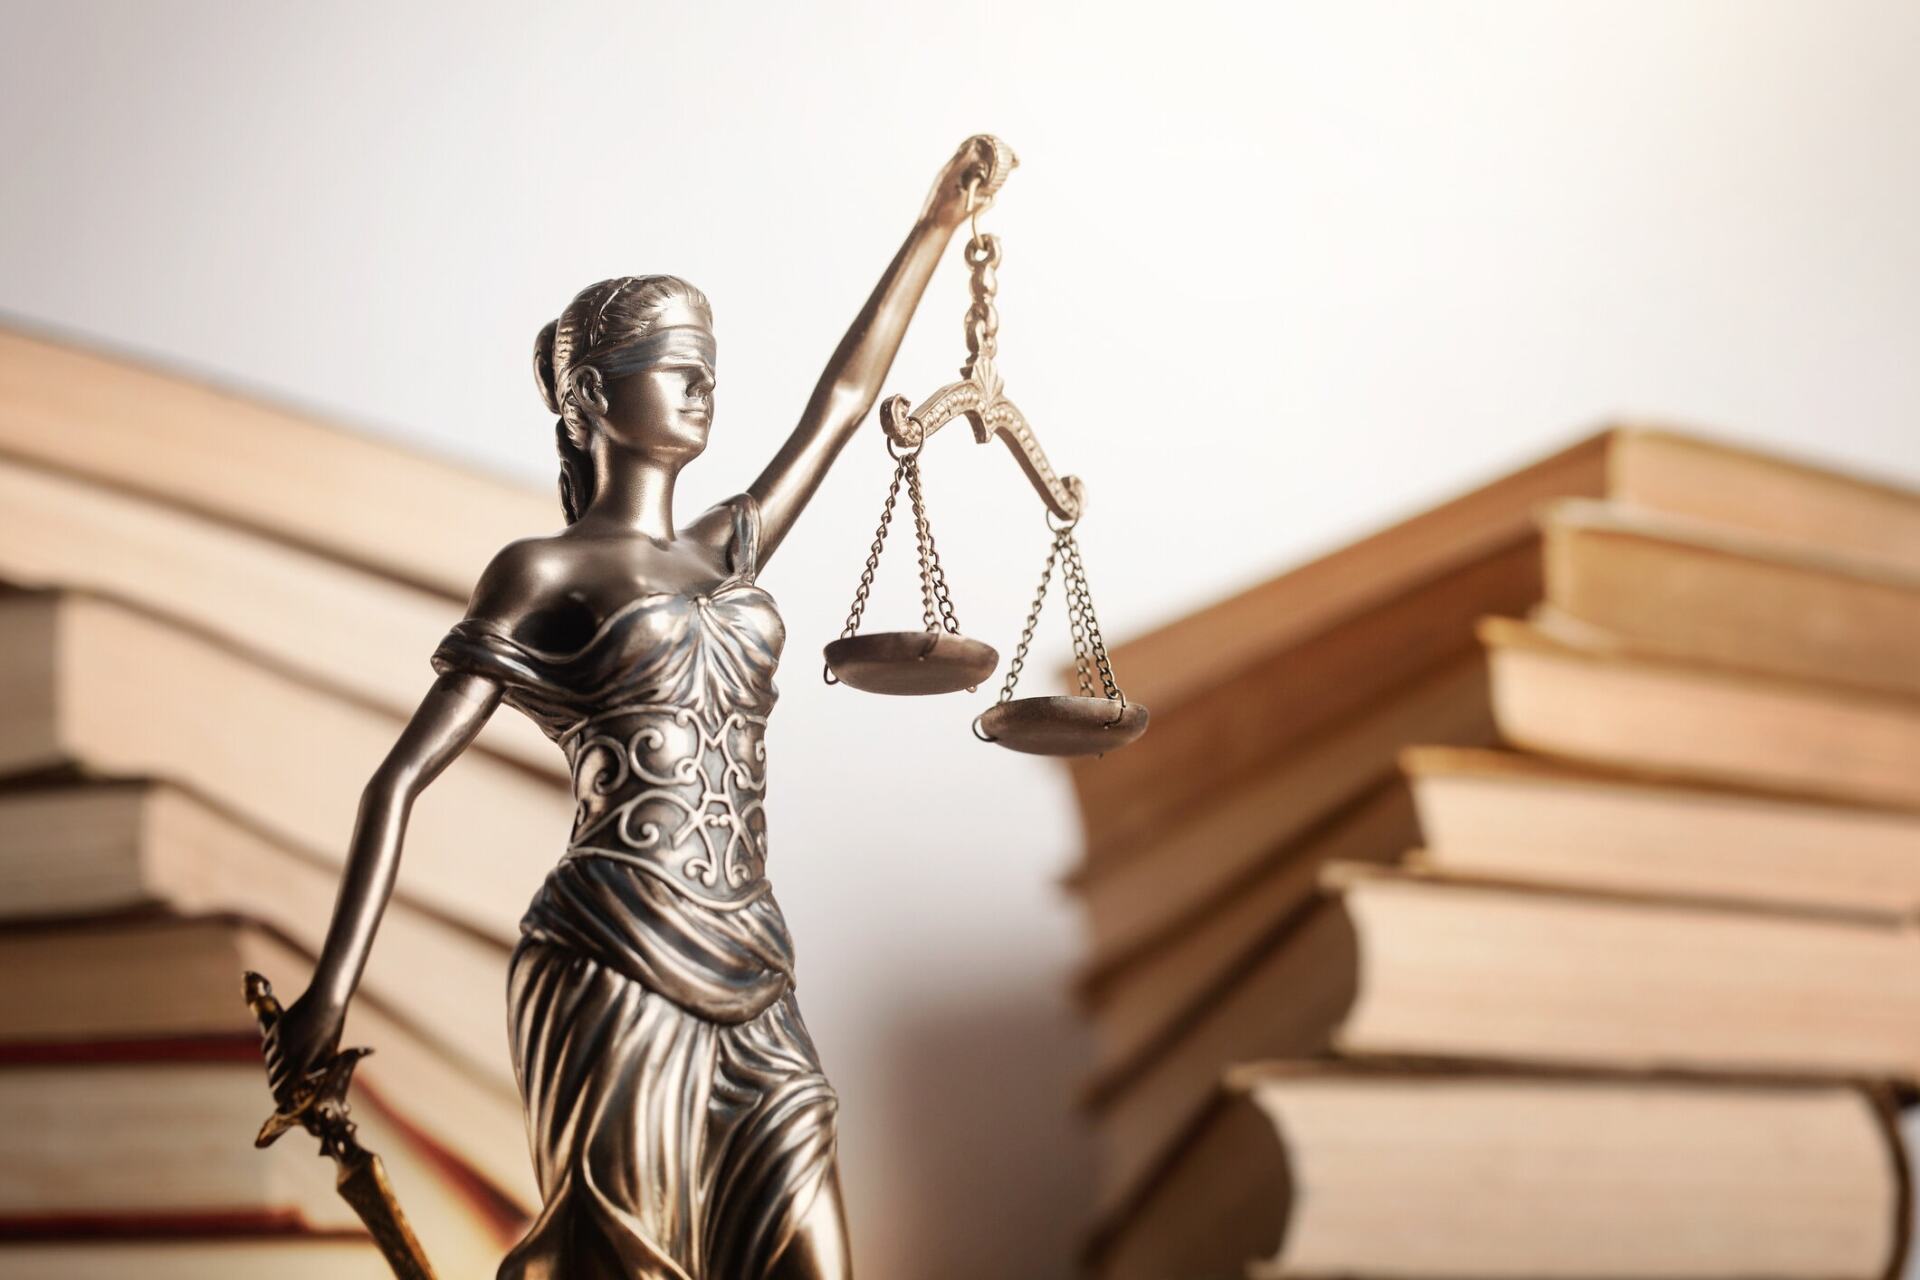 Lady With The Scales of Justice - Duncan, OK - The Kanehl Law Firm P.L.L.C.